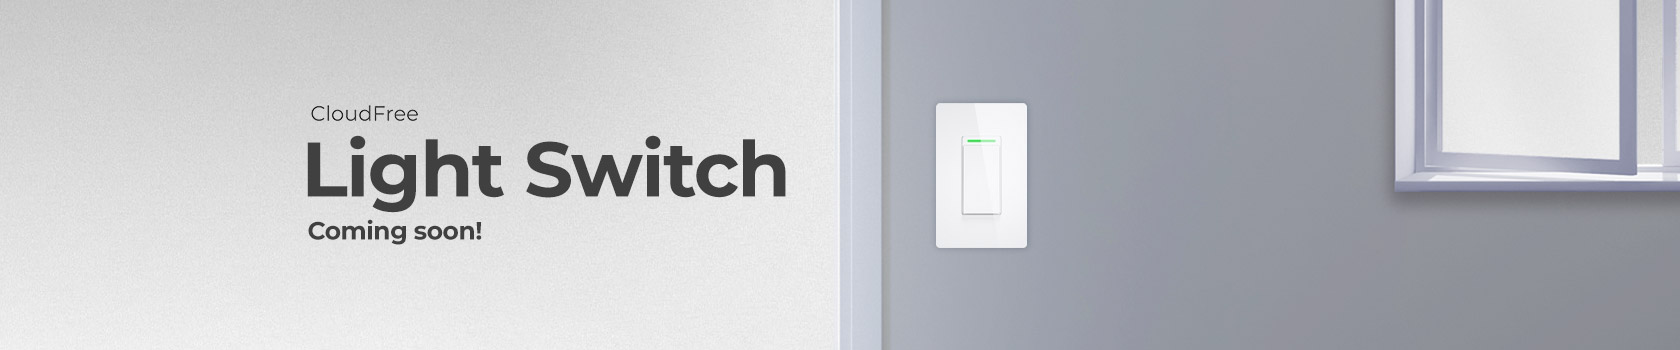 CloudFree Light Switch Coming Soon